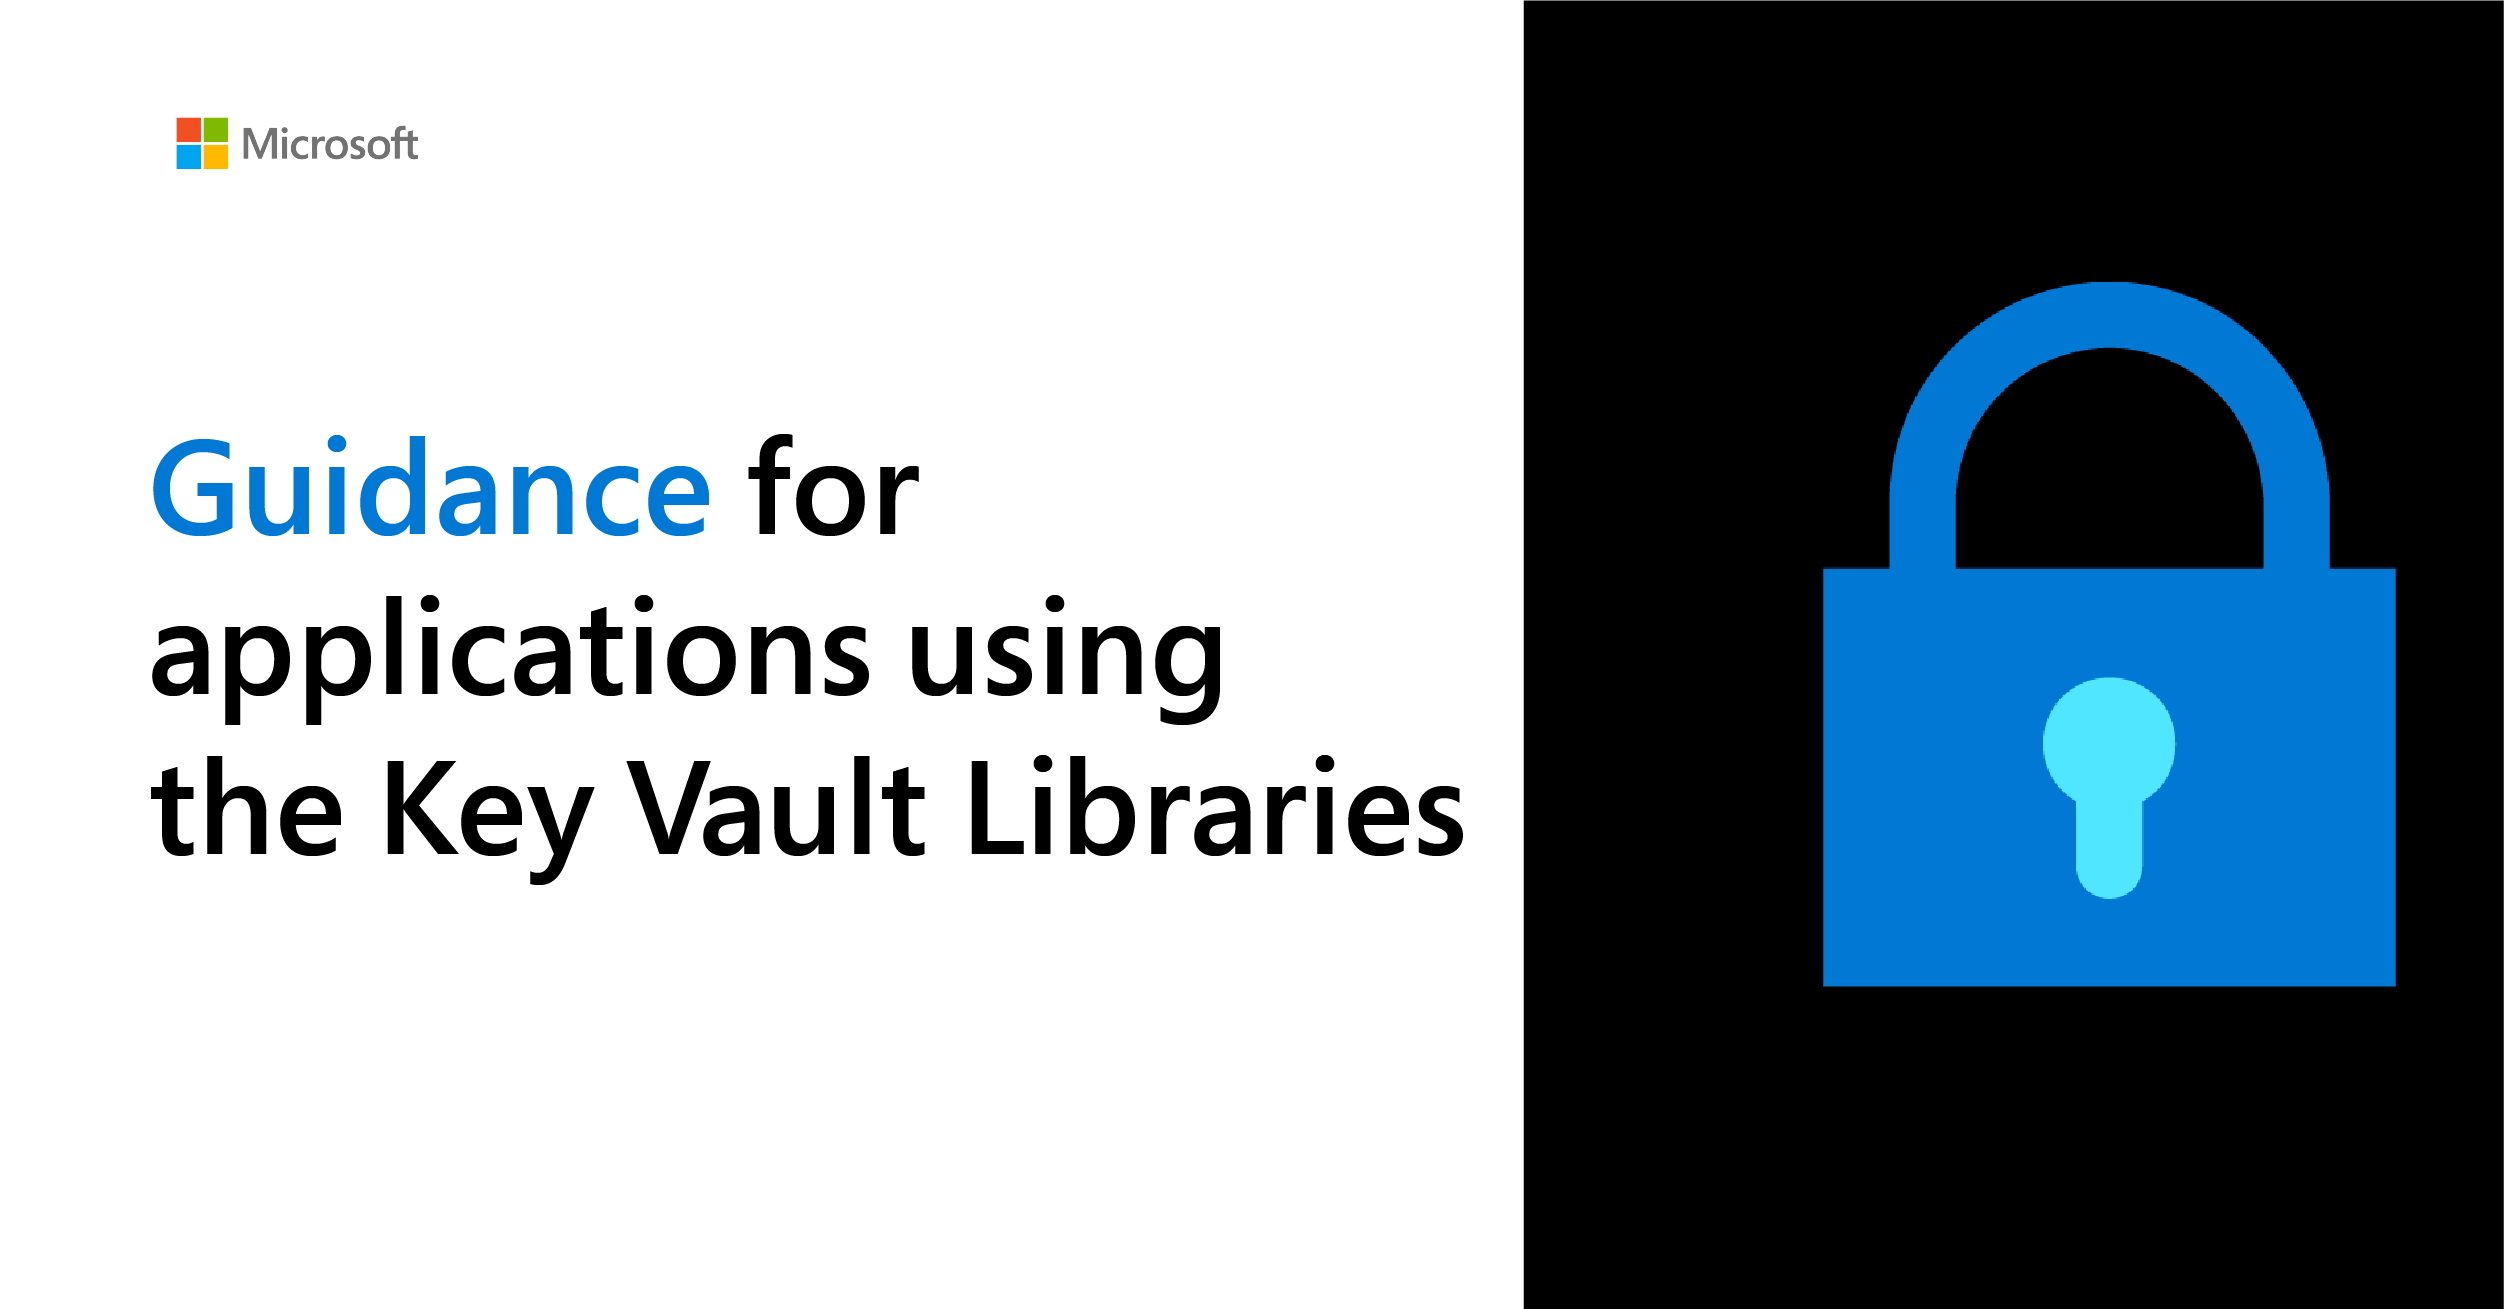 Guidance for applications using the Key Vault Libraries